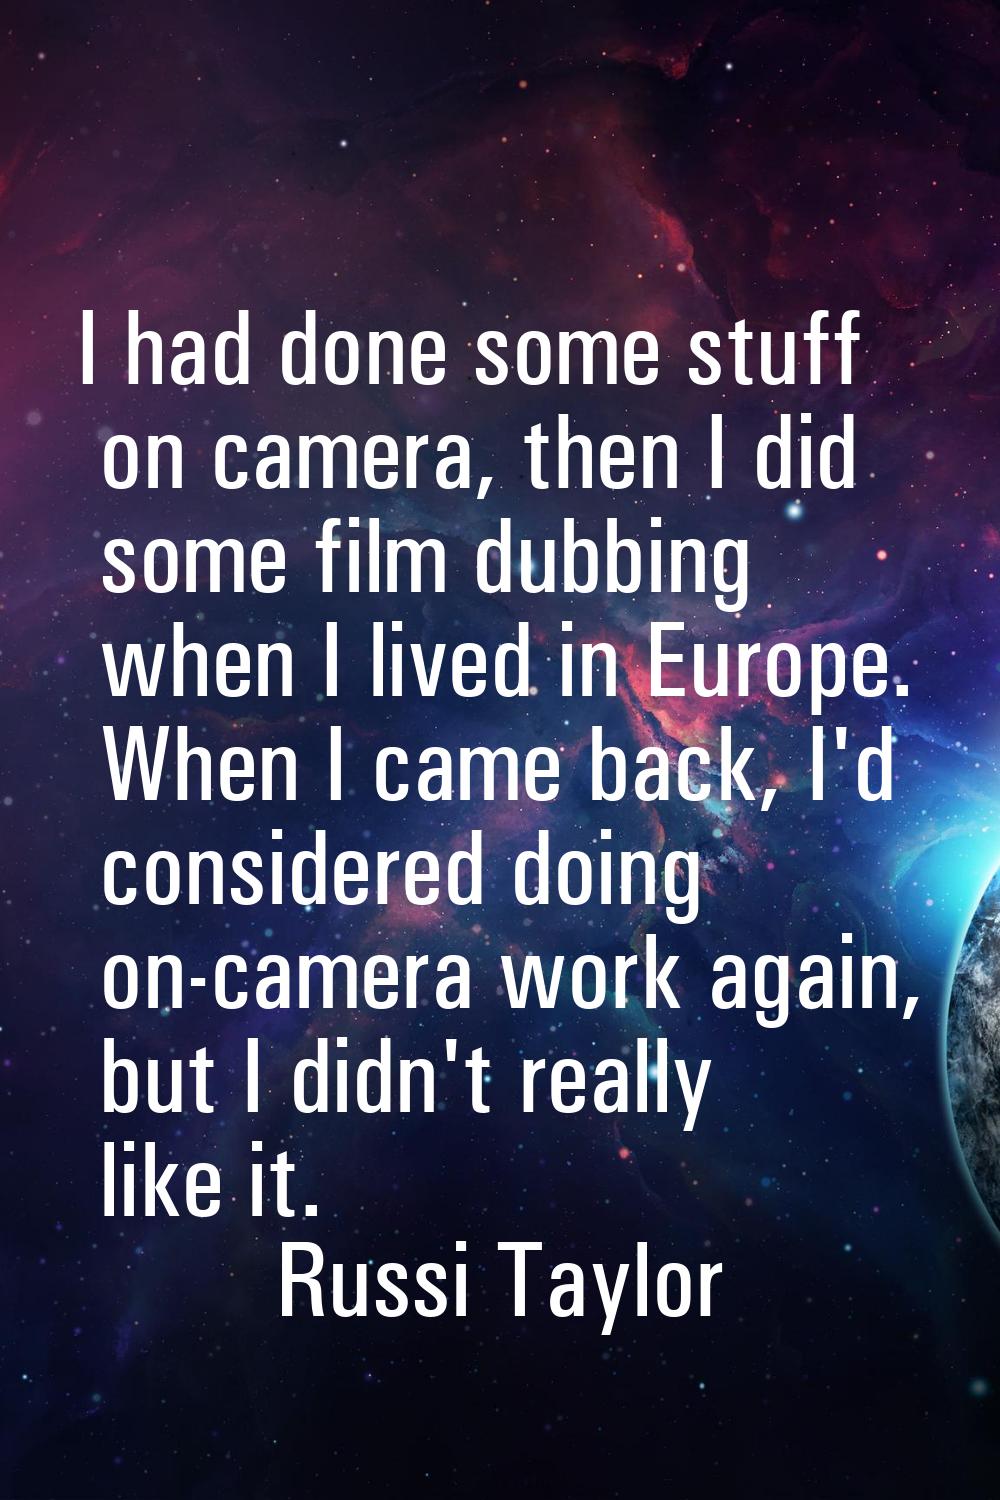 I had done some stuff on camera, then I did some film dubbing when I lived in Europe. When I came b